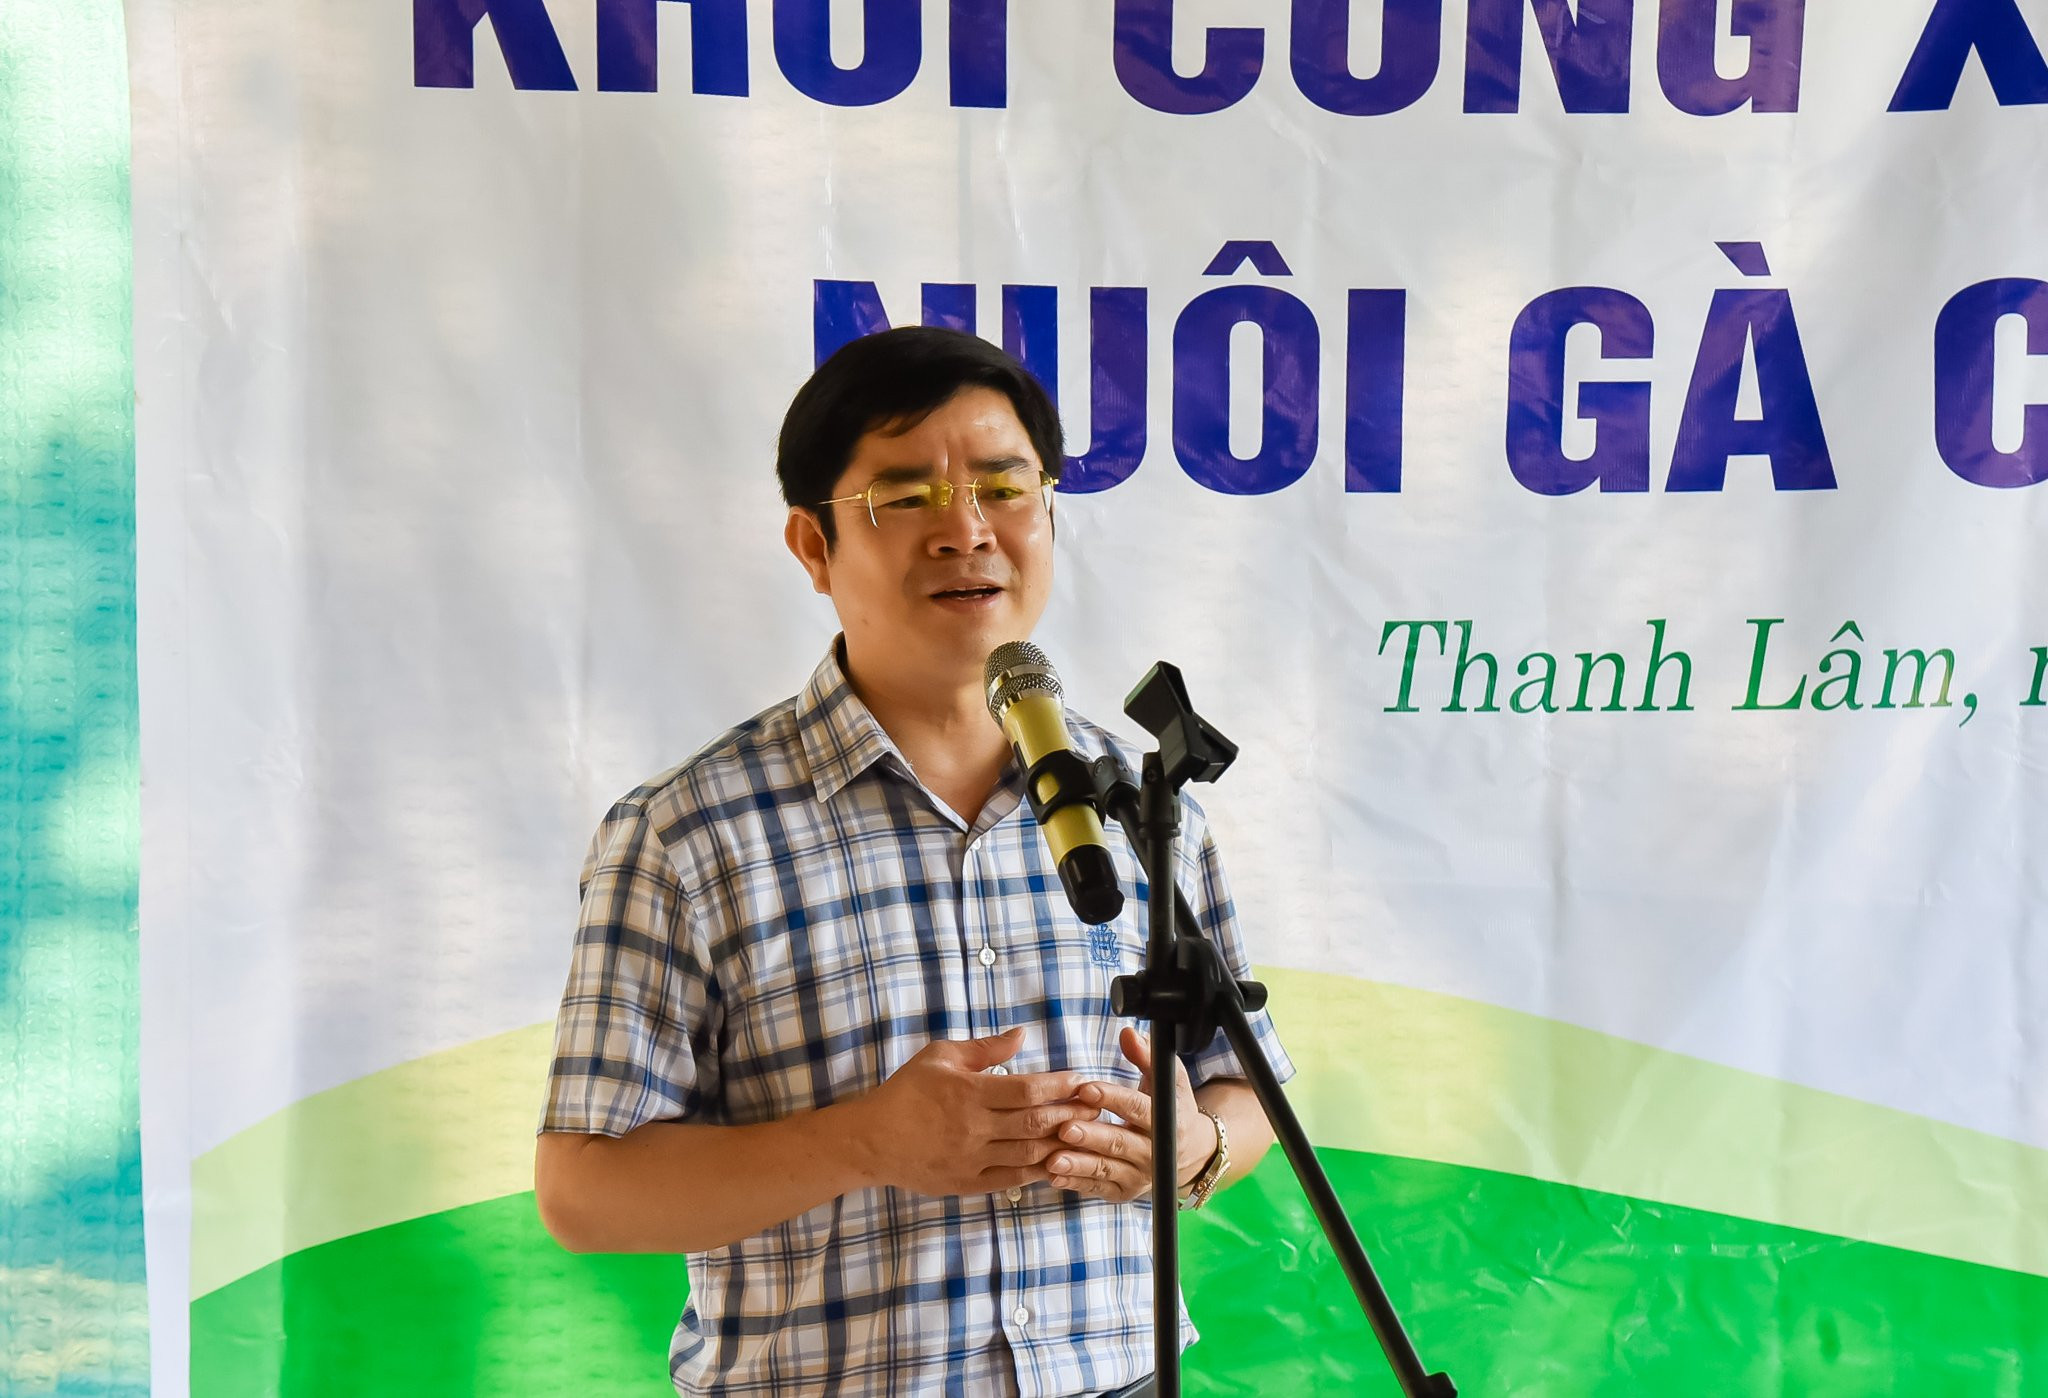 bna-anh-nha-anh-thanh-le-5392.jpg